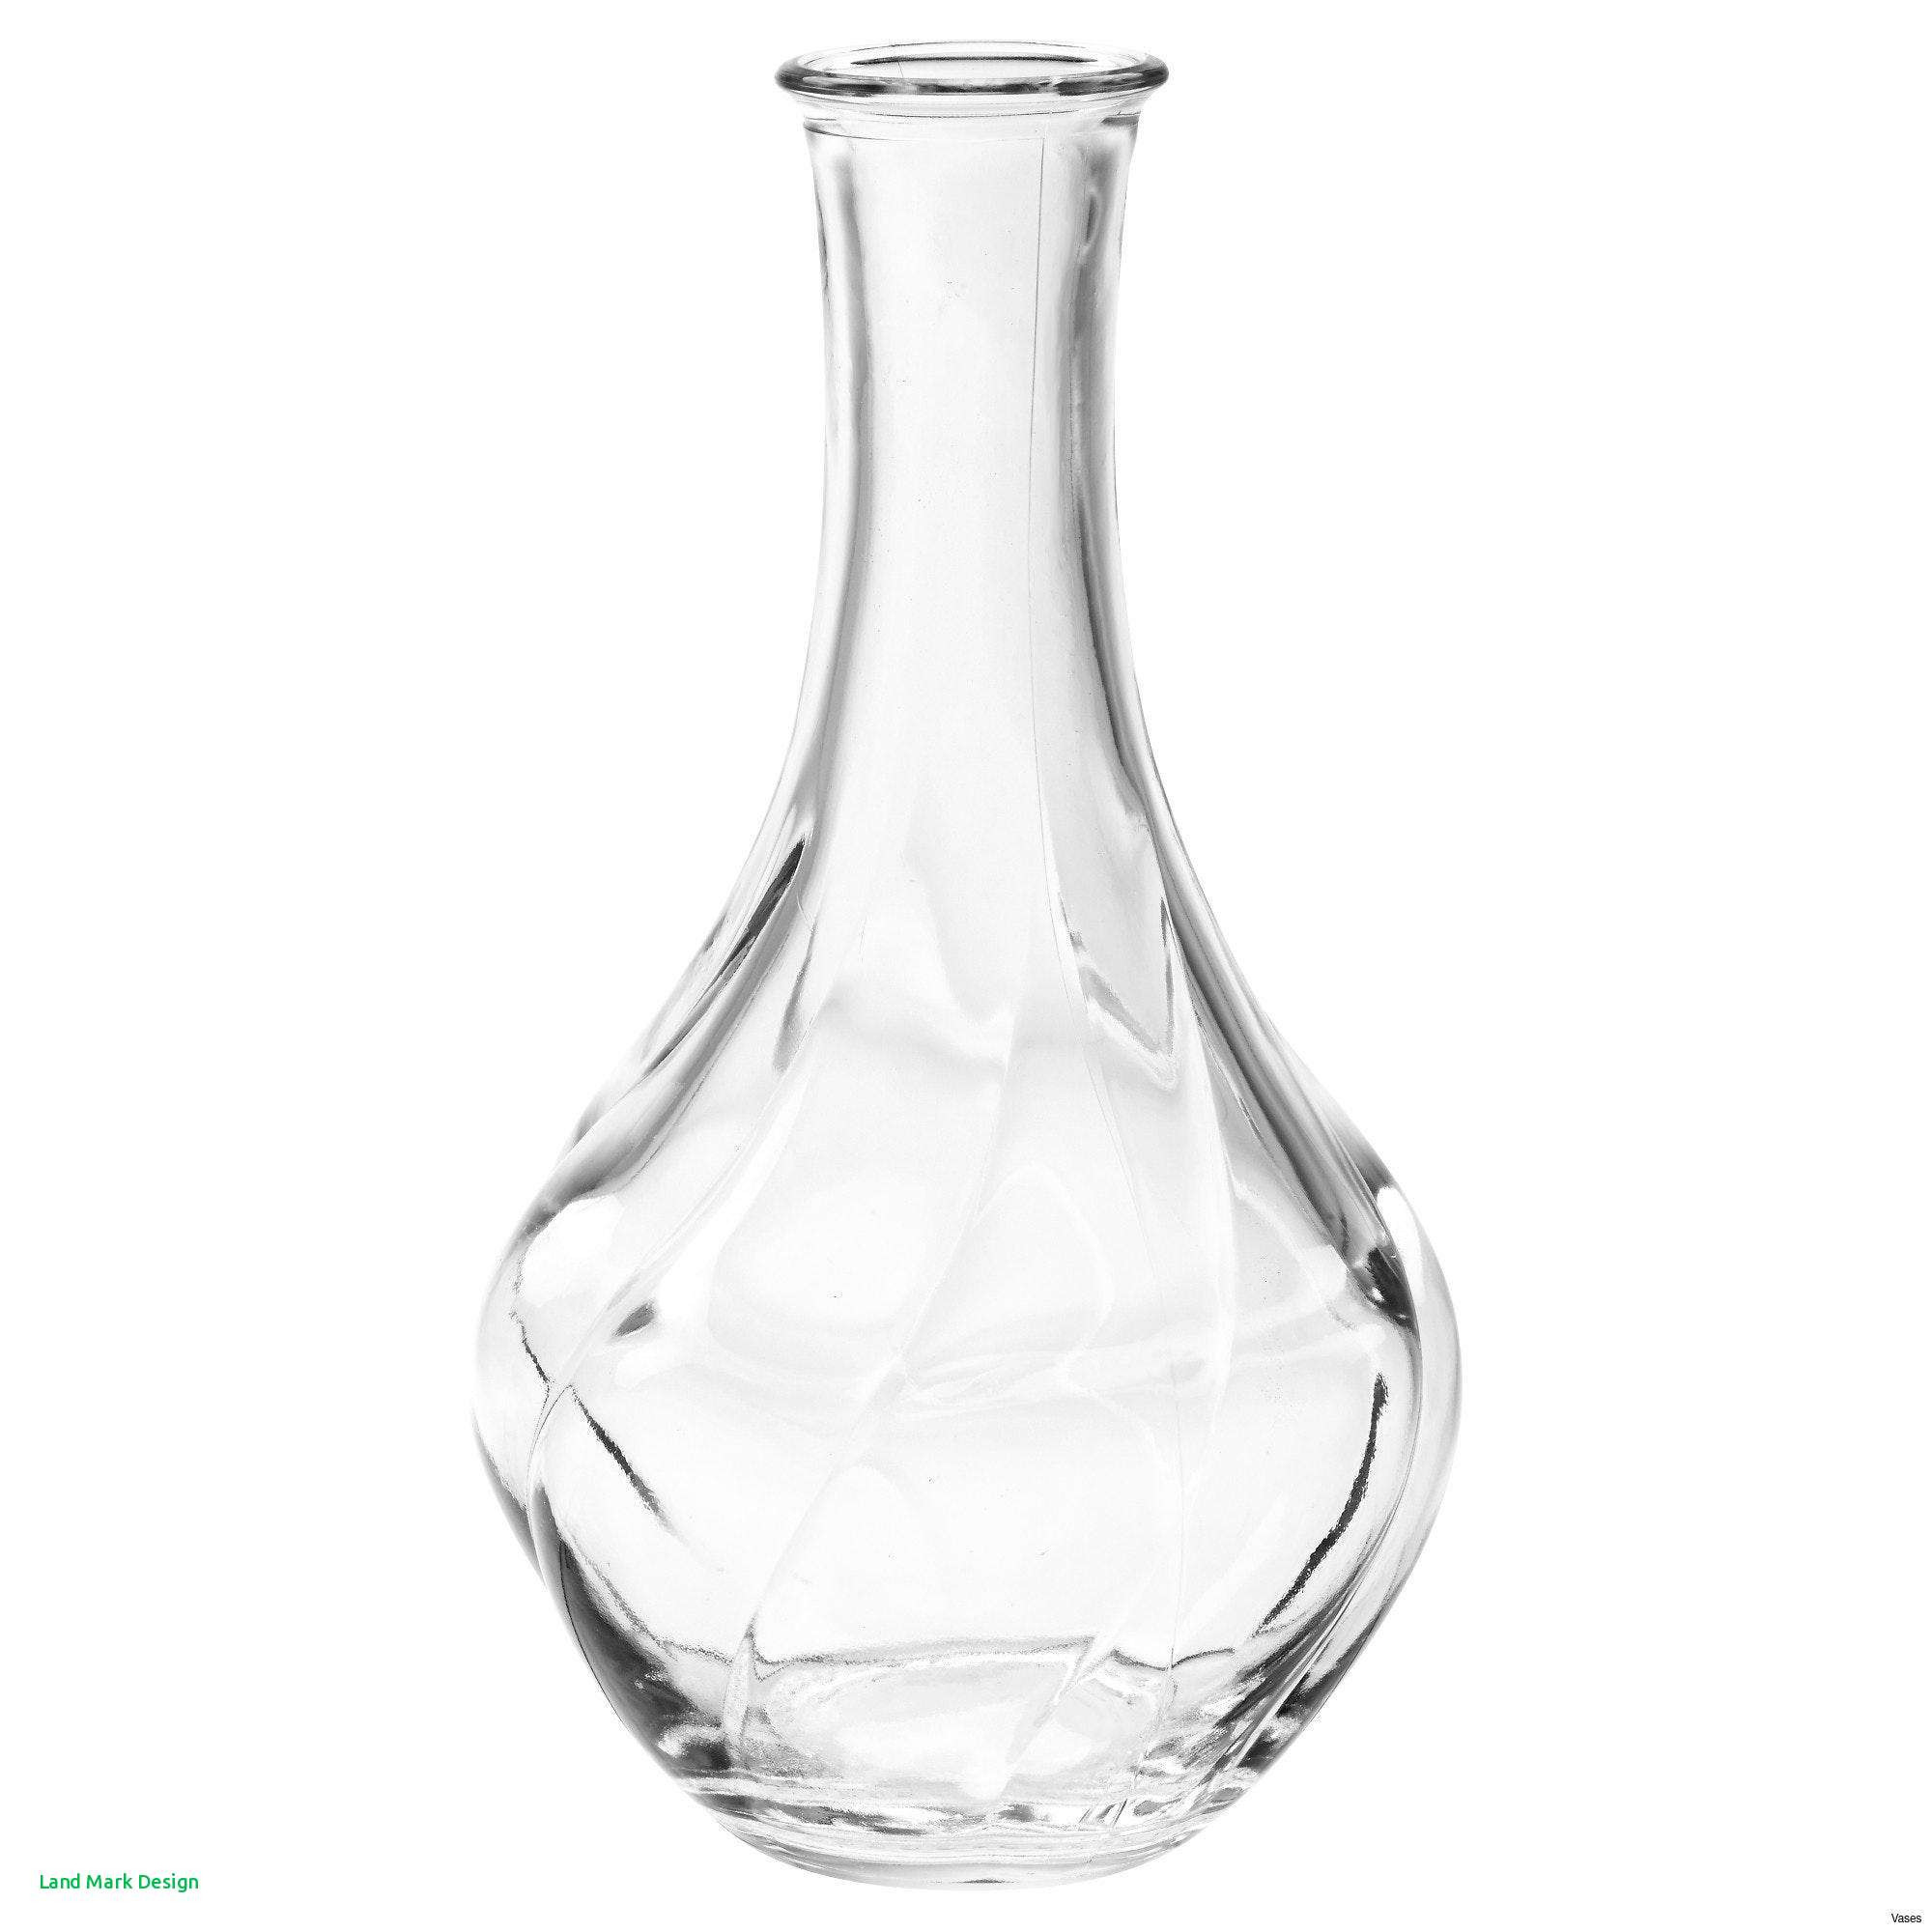 Cracked Glass Vase Of Glass Table Images Home Design Home Design with Full Size Of Living Room Large Glass Vases Fresh Clear Vase 0d Tags Amazing Elegant Large